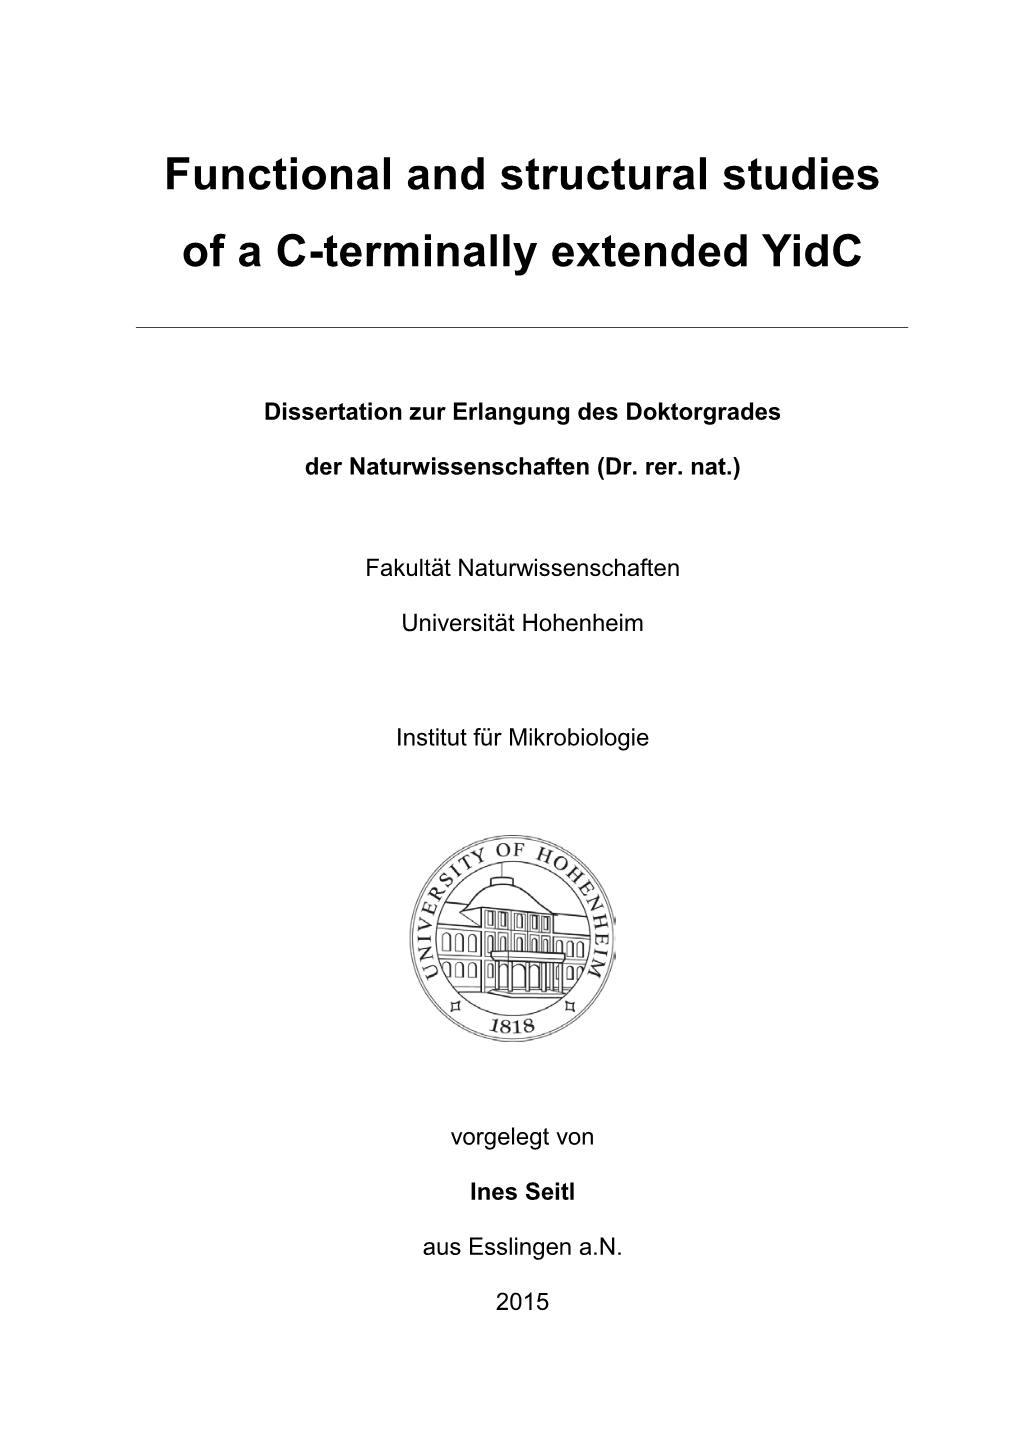 Functional and Structural Studies of a C-Terminally Extended Yidc